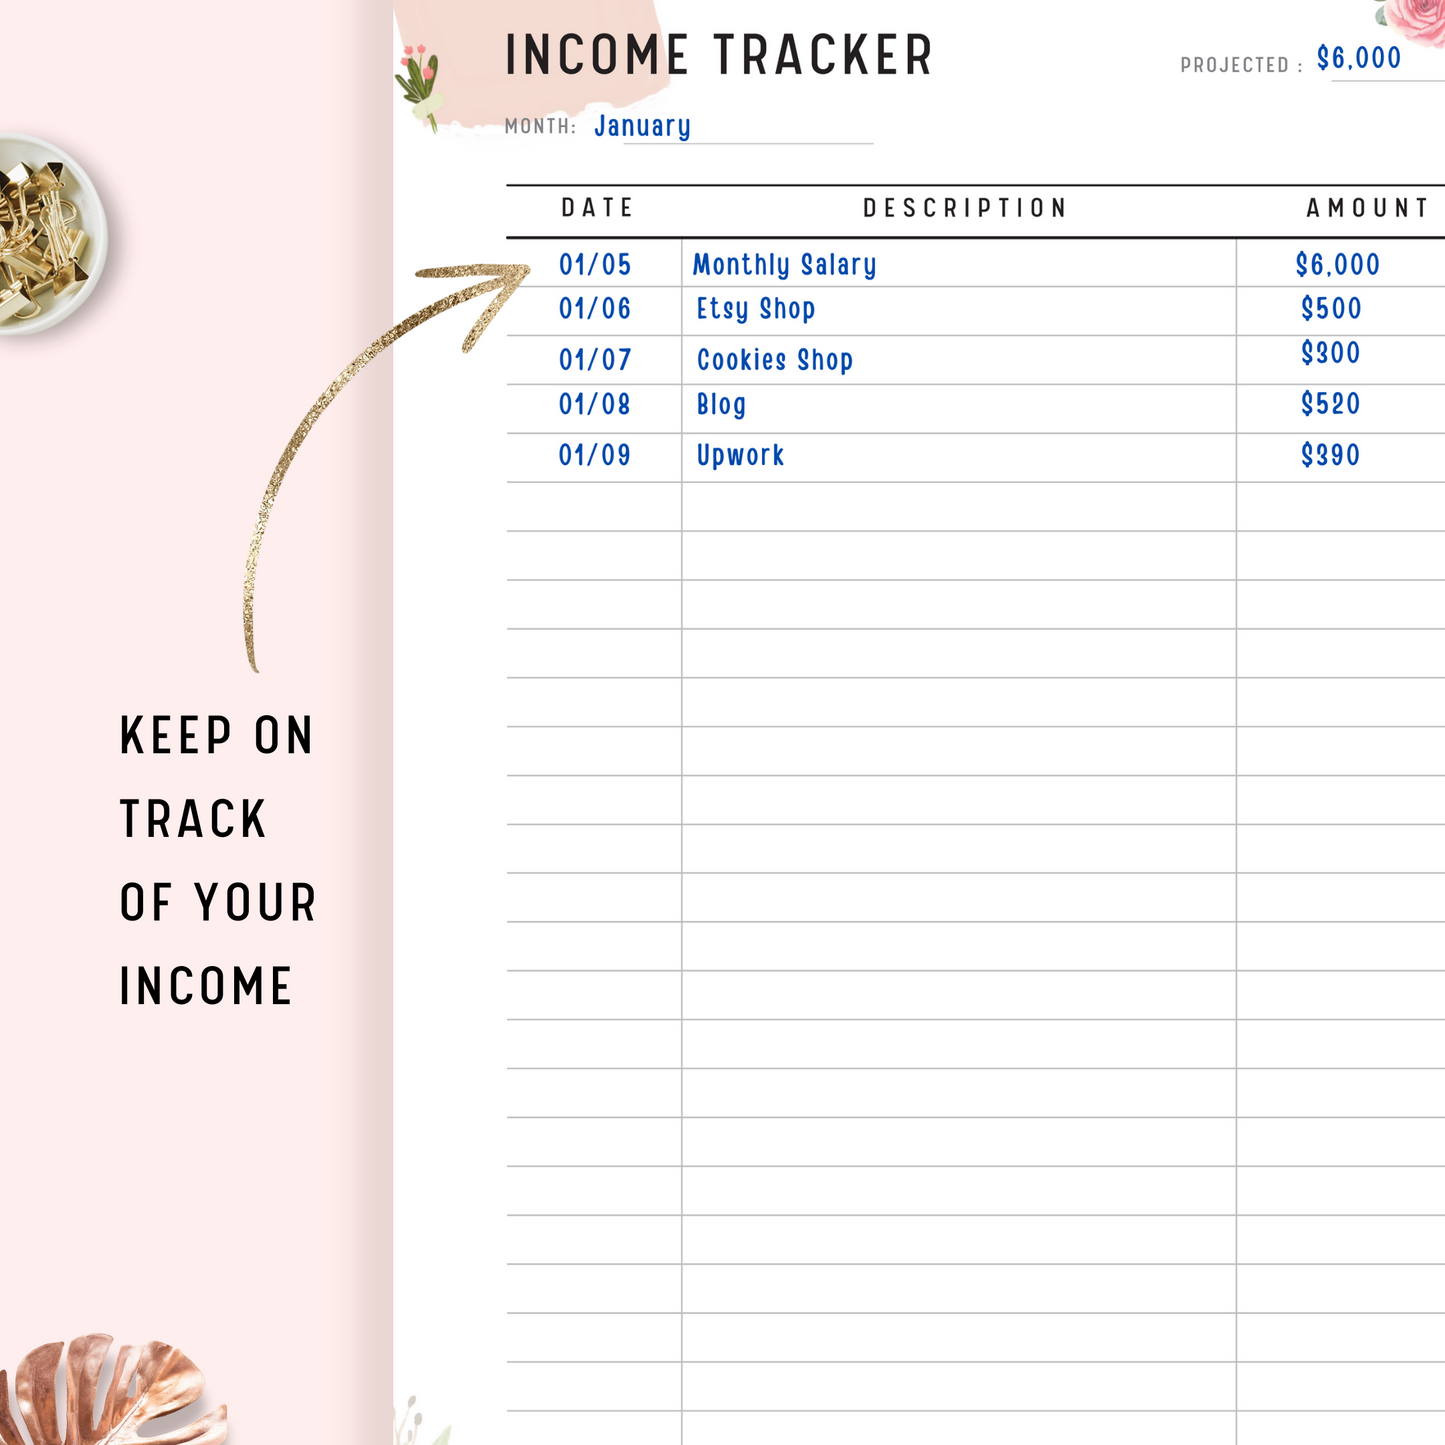 Floral Income Tracker with monthly projected, and detail list incomes